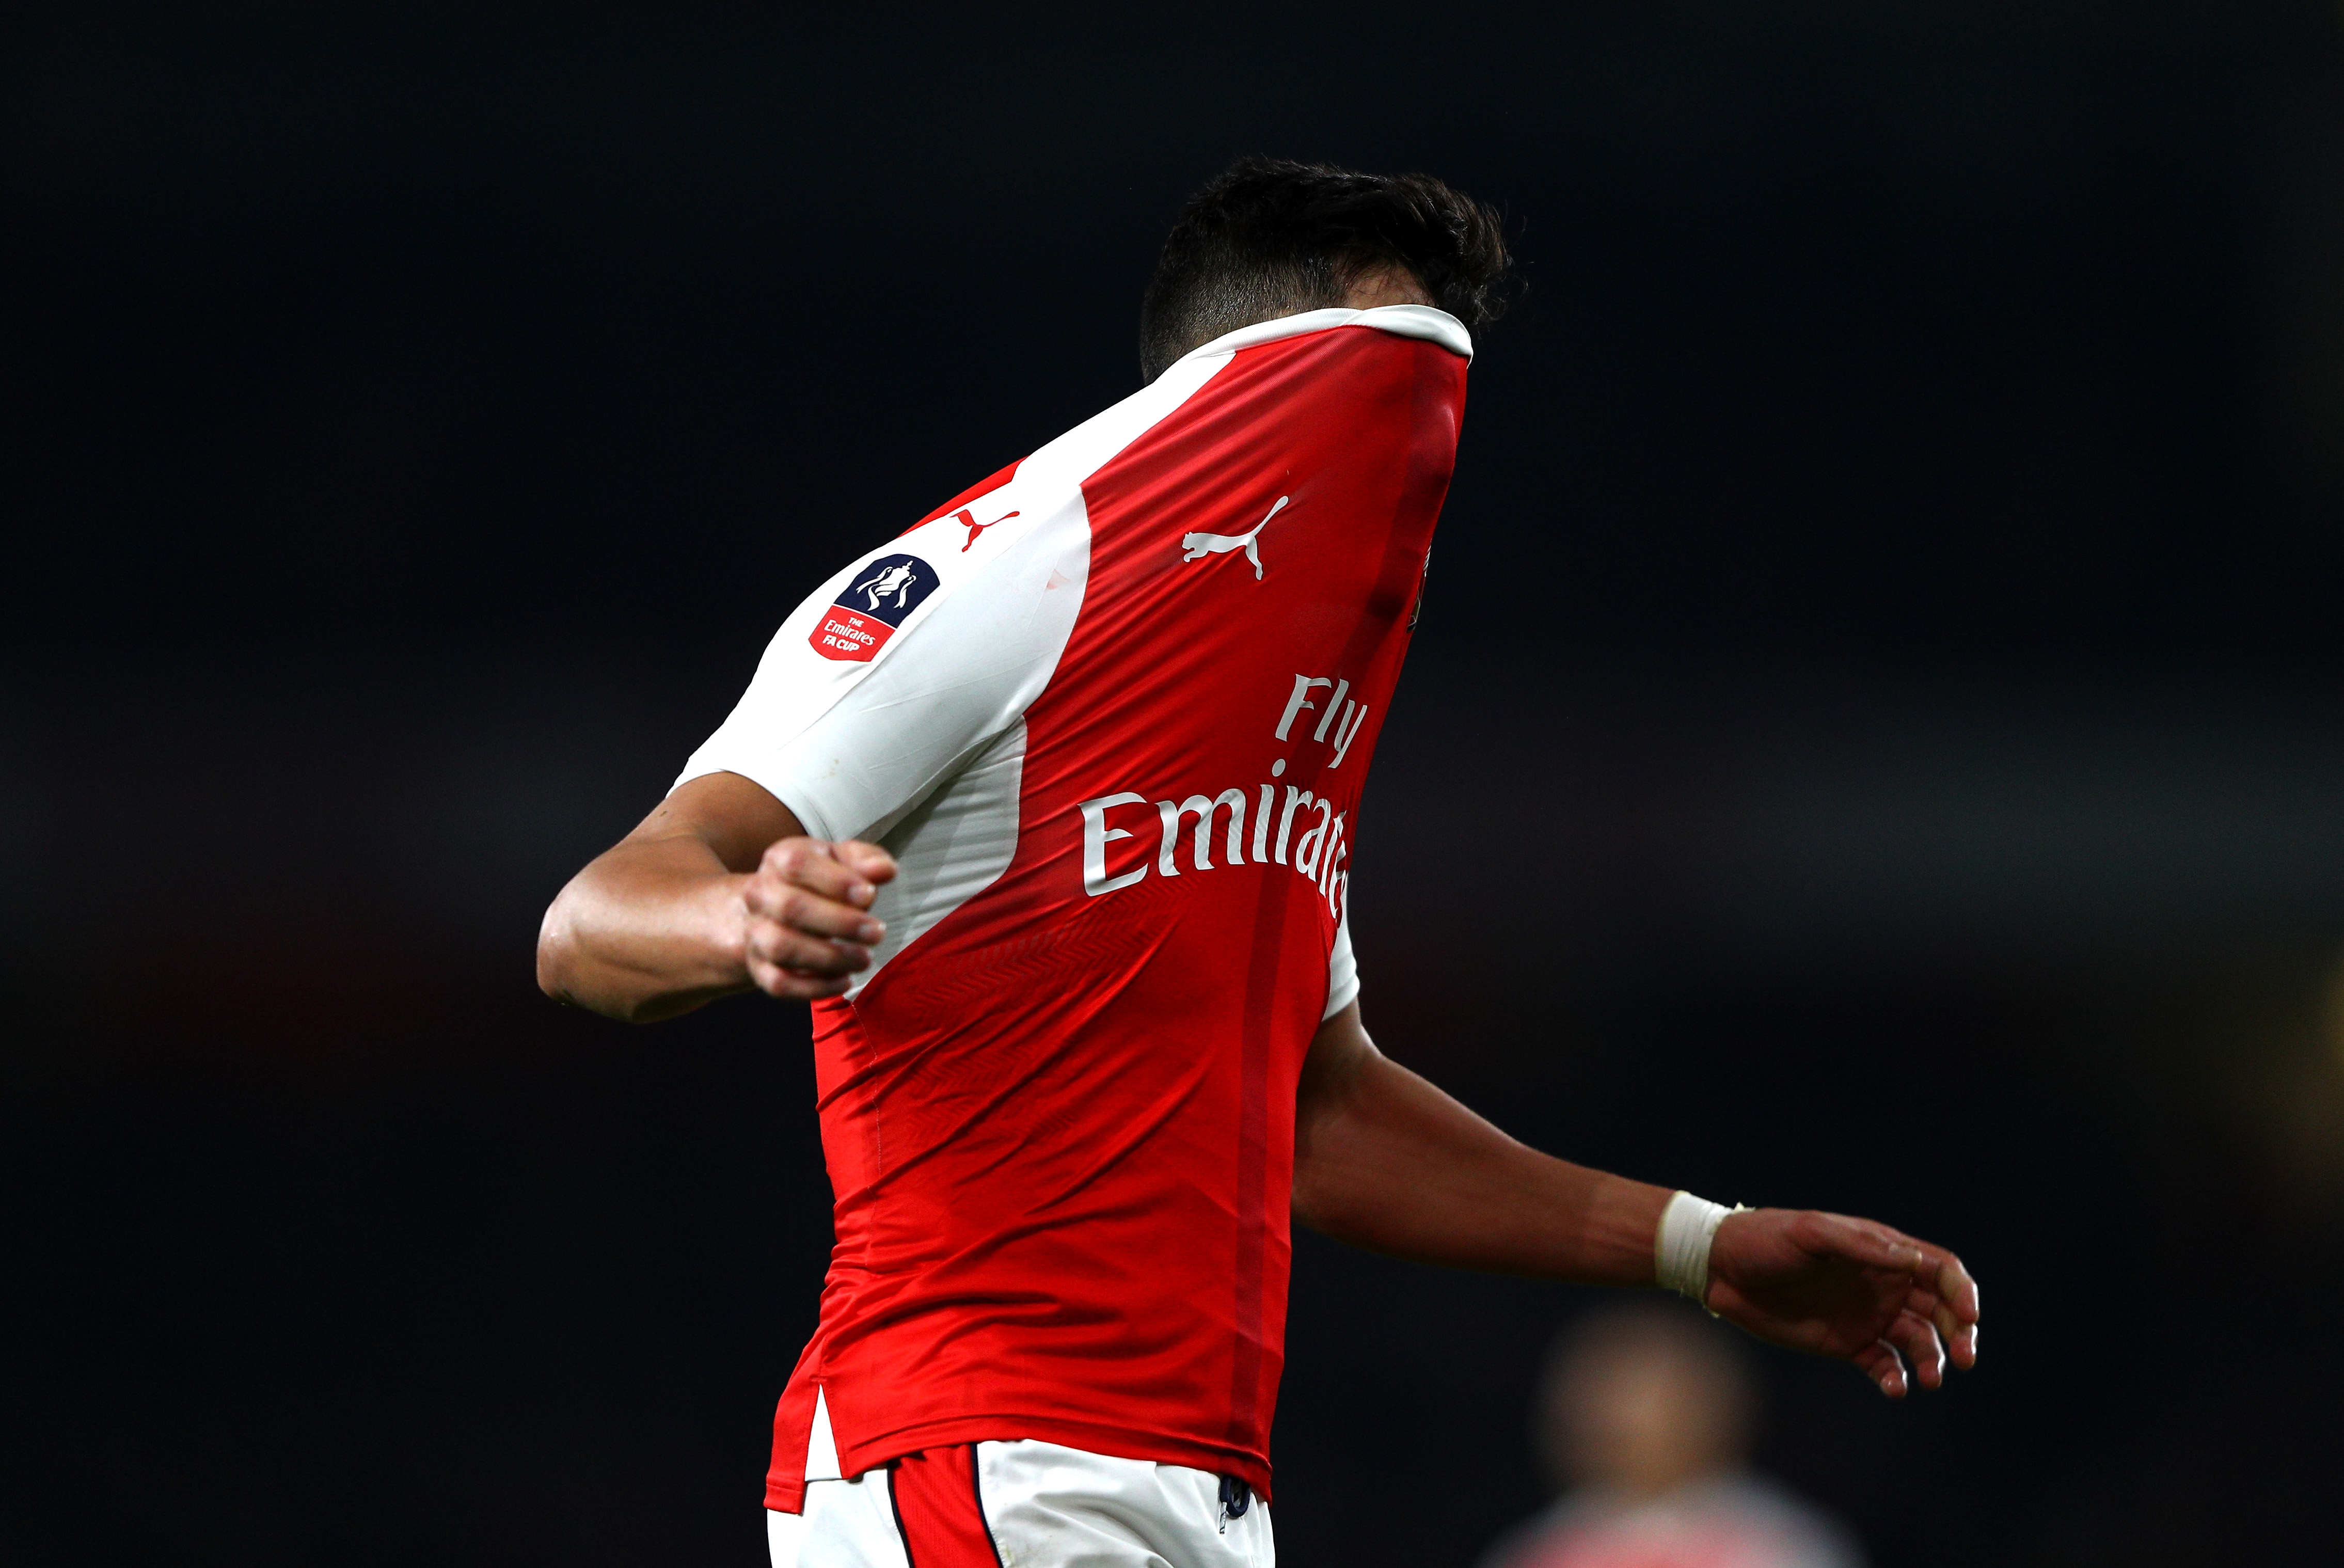 LONDON, ENGLAND - MARCH 11:  Alexis Sanchez of Arsenal reacts after The Emirates FA Cup Quarter-Final match between Arsenal and Lincoln City at Emirates Stadium on March 11, 2017 in London, England.  (Photo by Ian Walton/Getty Images)